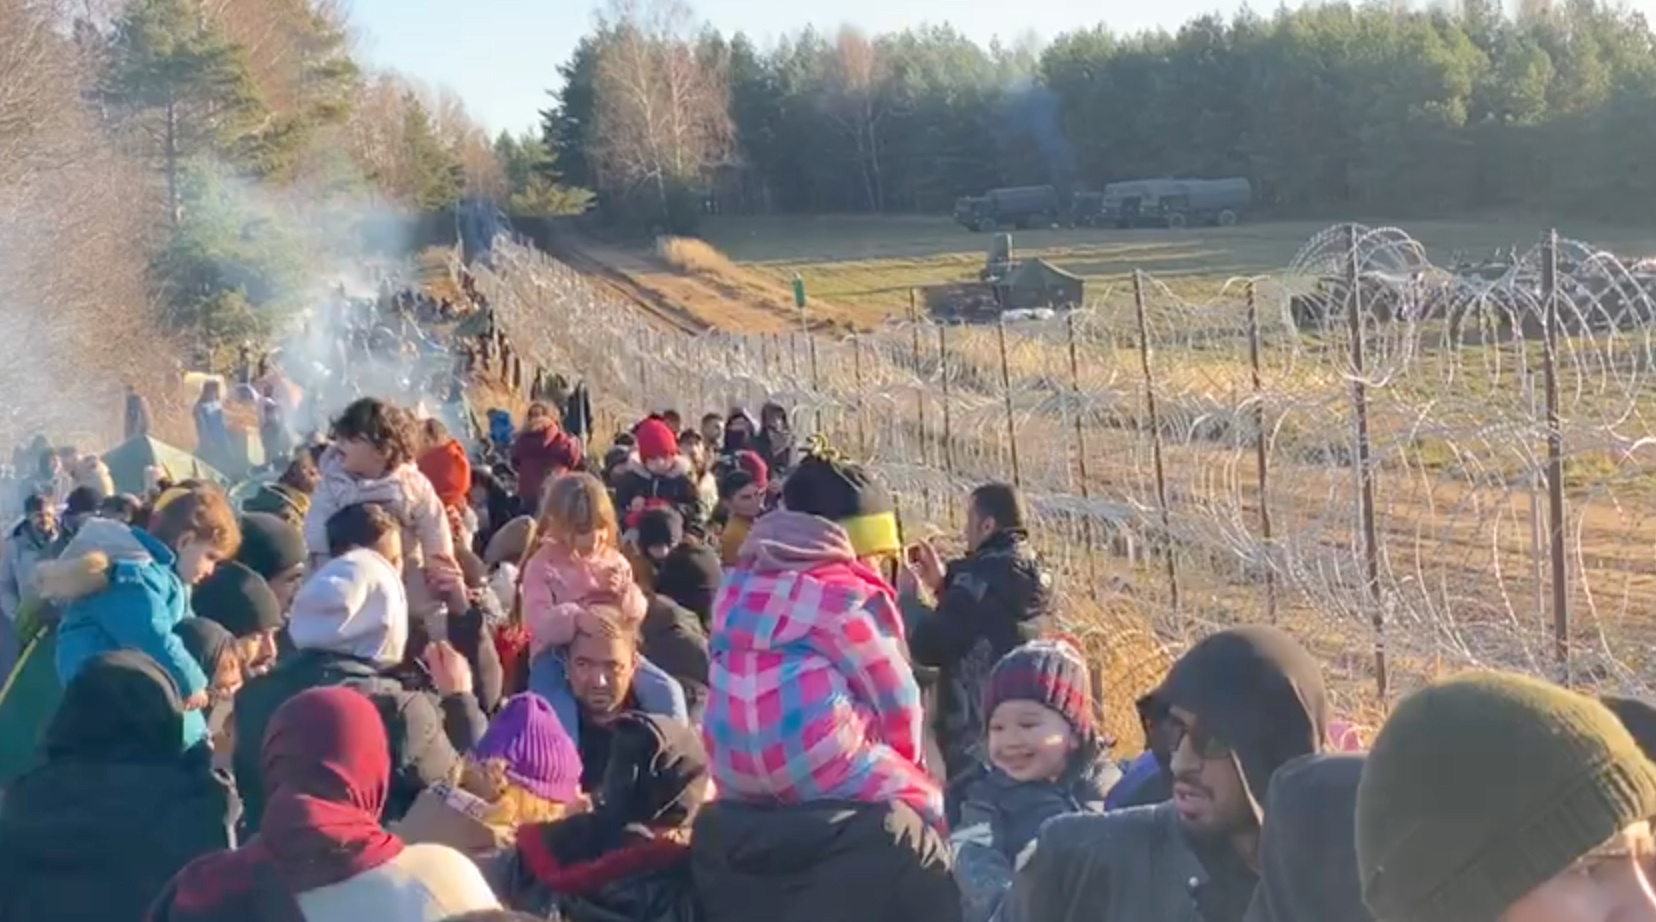 Migrants gather near a barbed wire fence on the Poland - Belarus border